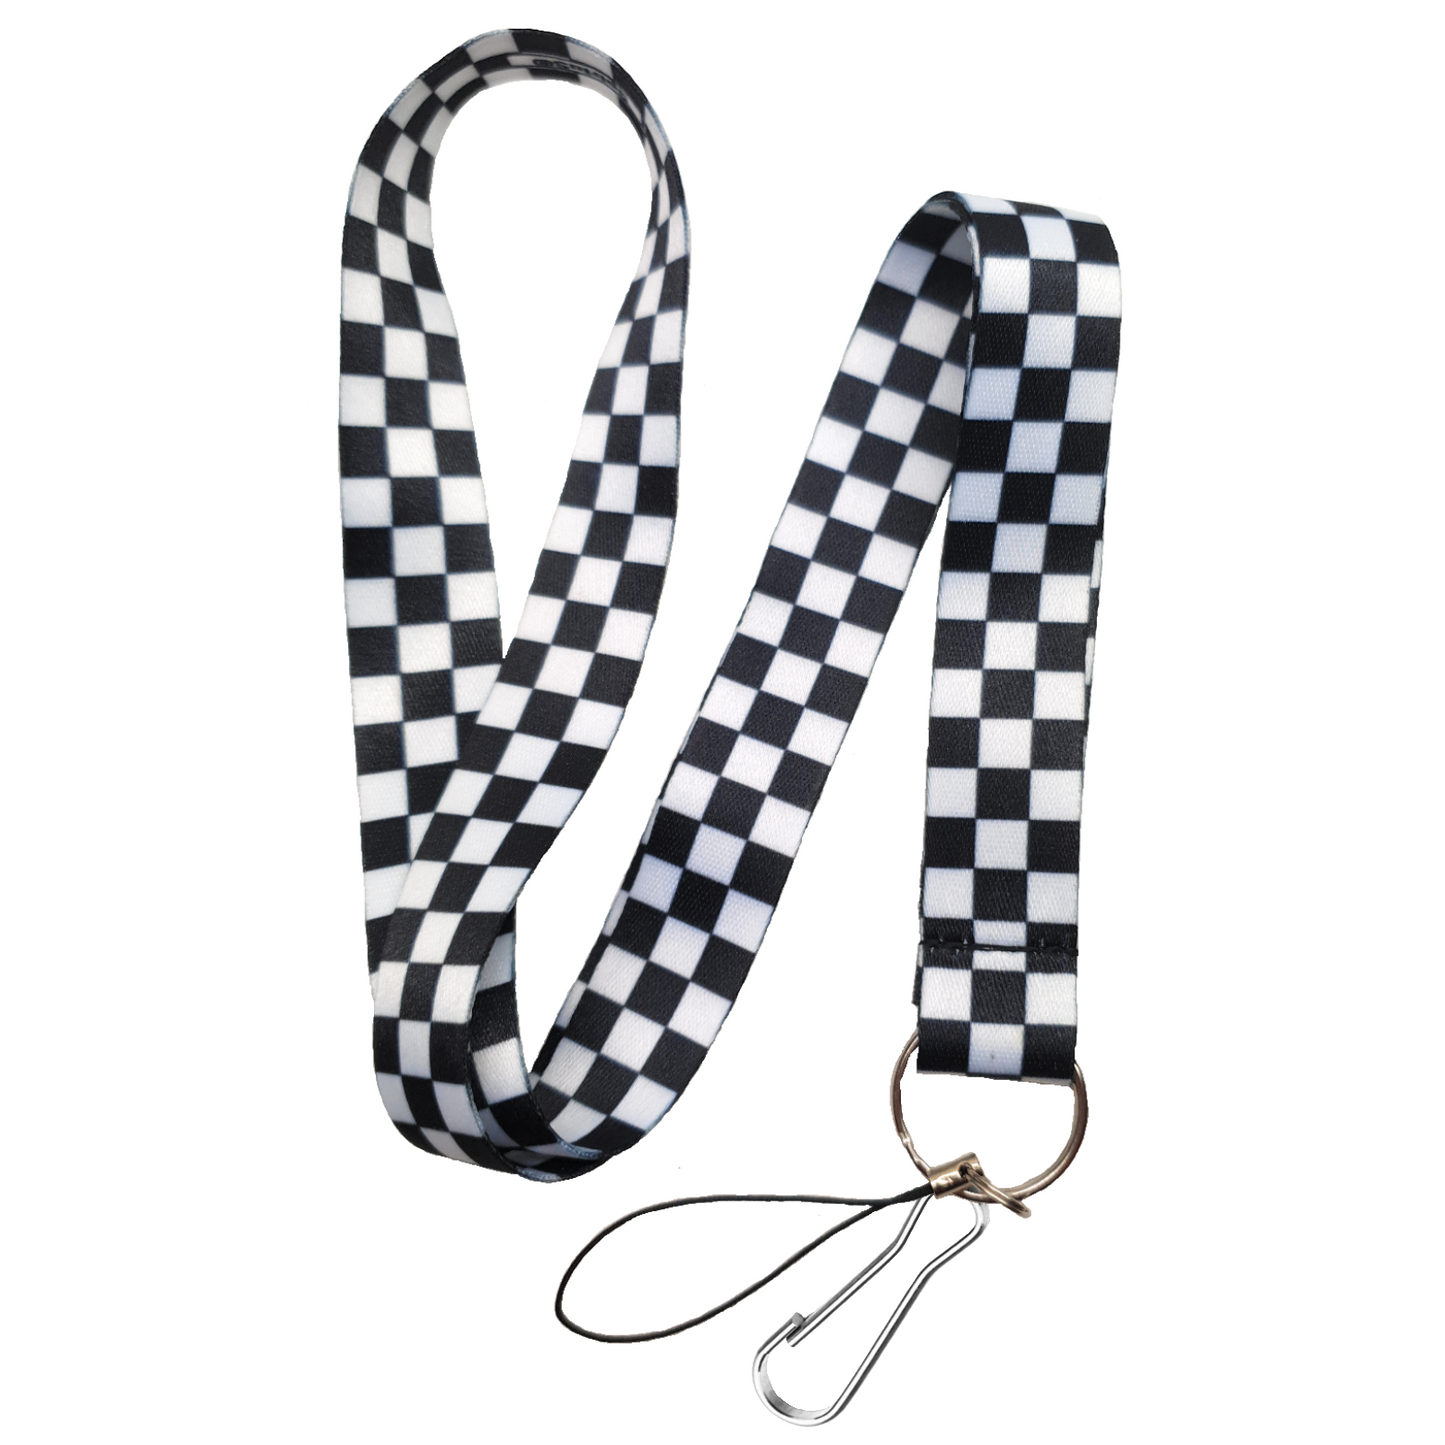 Lanyard Neck strap for ID card badge Holder with retractable reel Red &  White braid pattern